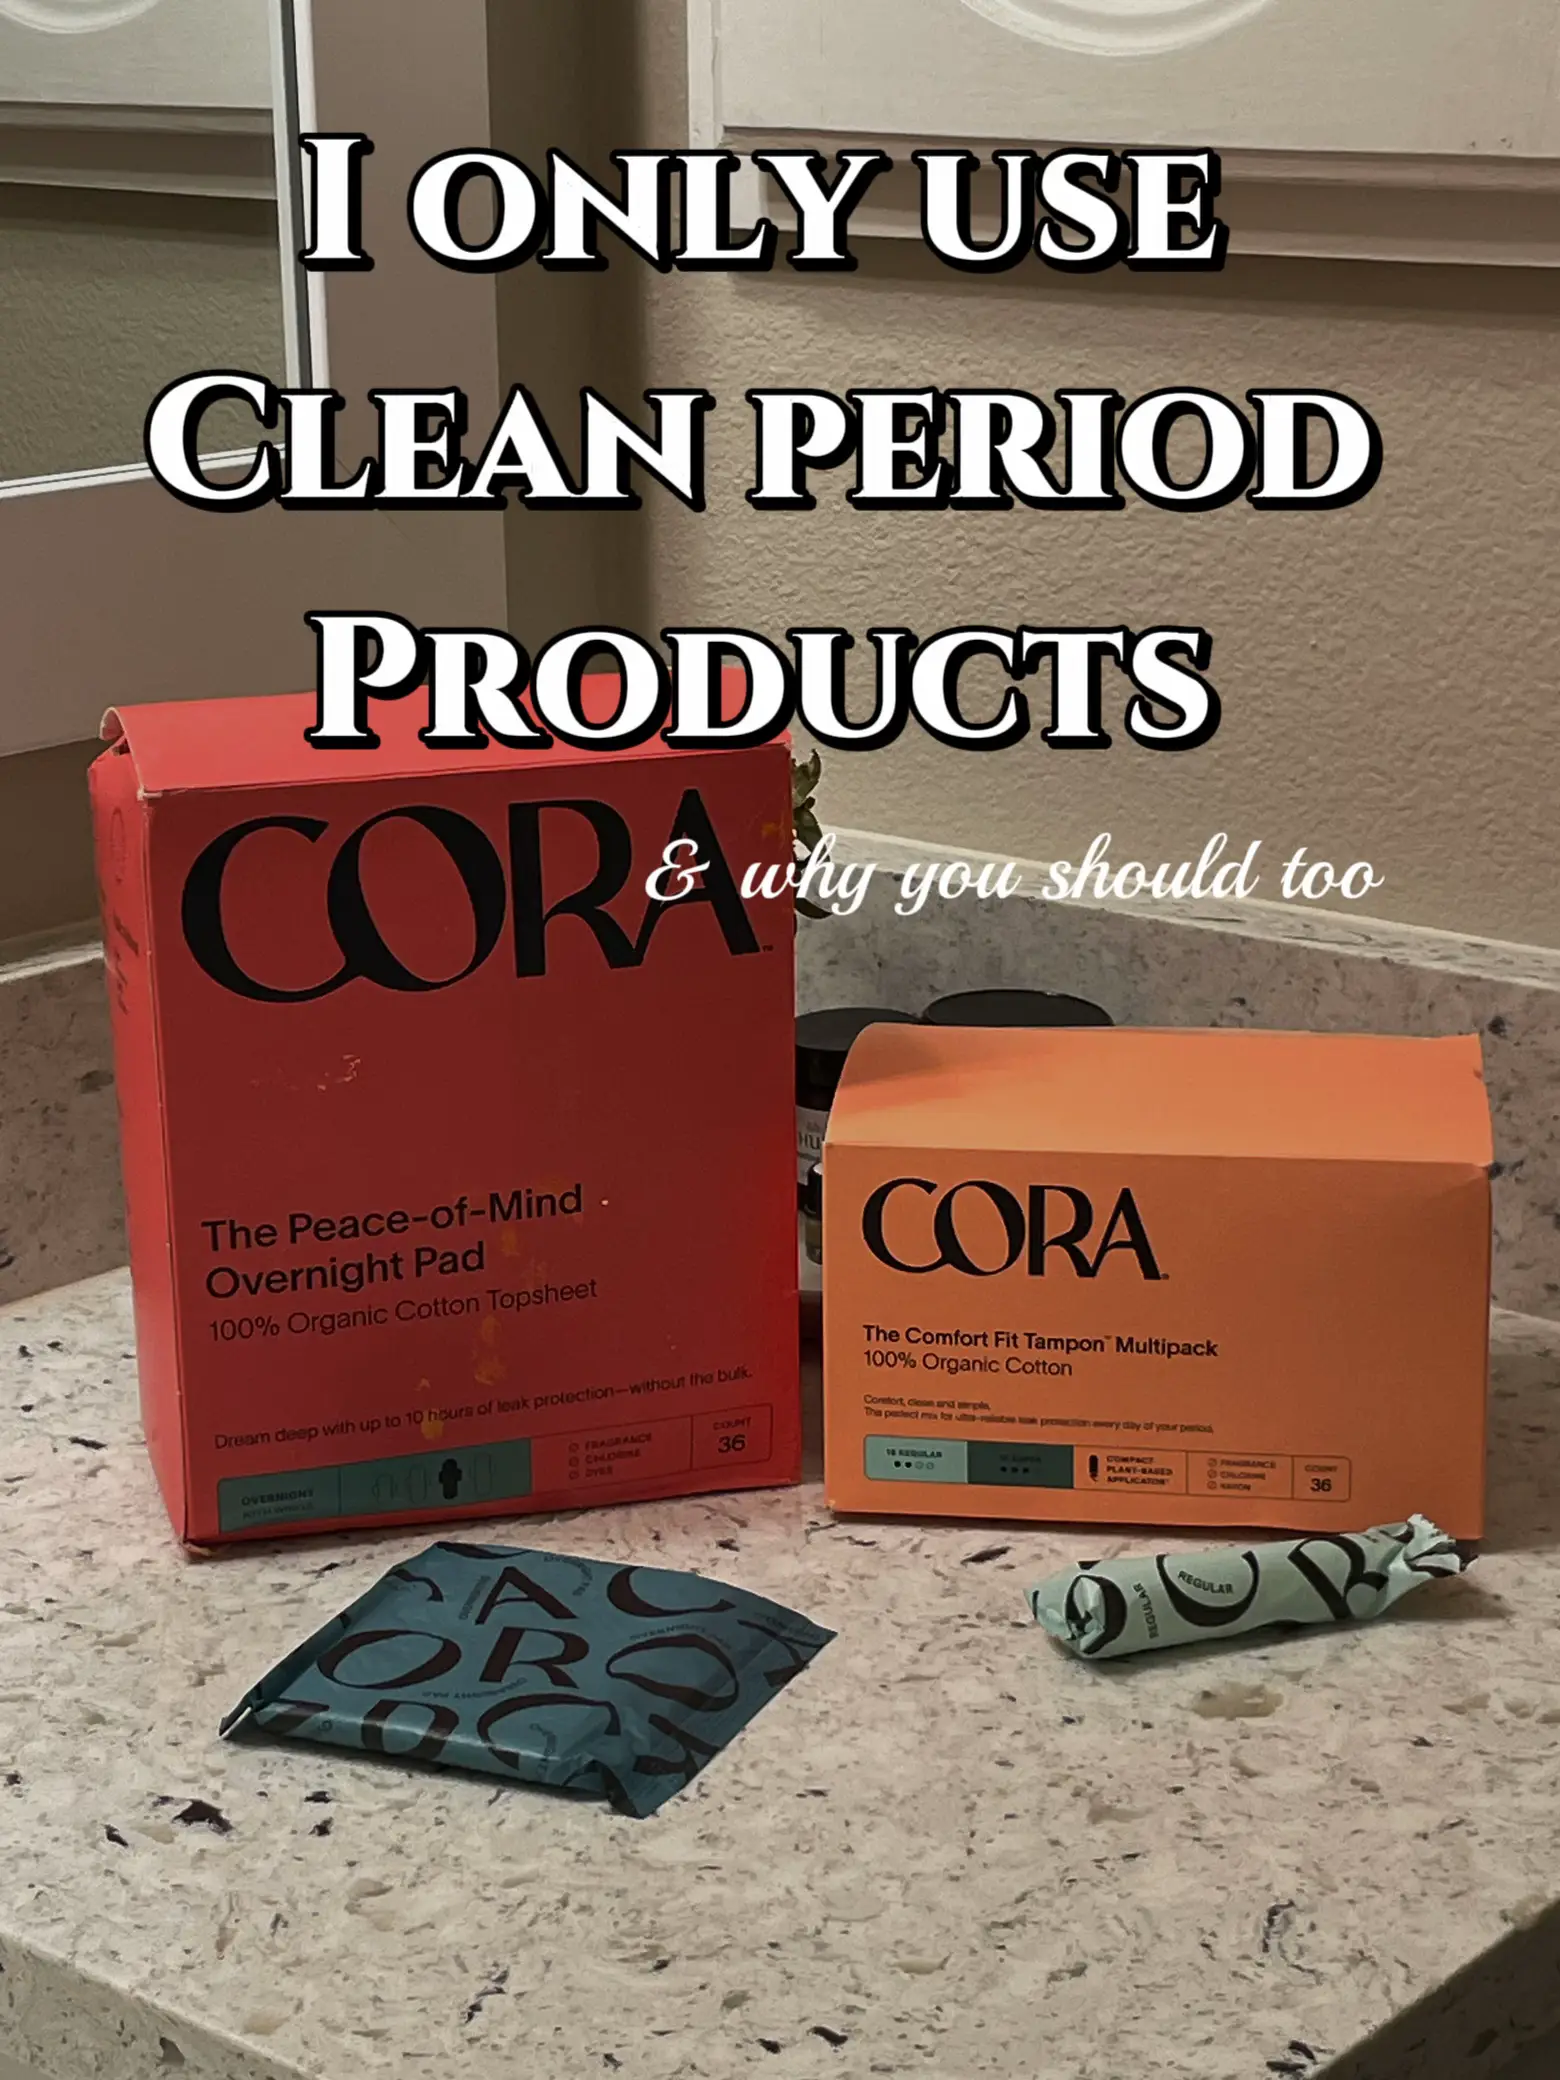  A blue box of Cora clean period products and a pink box of Cora clean period products.